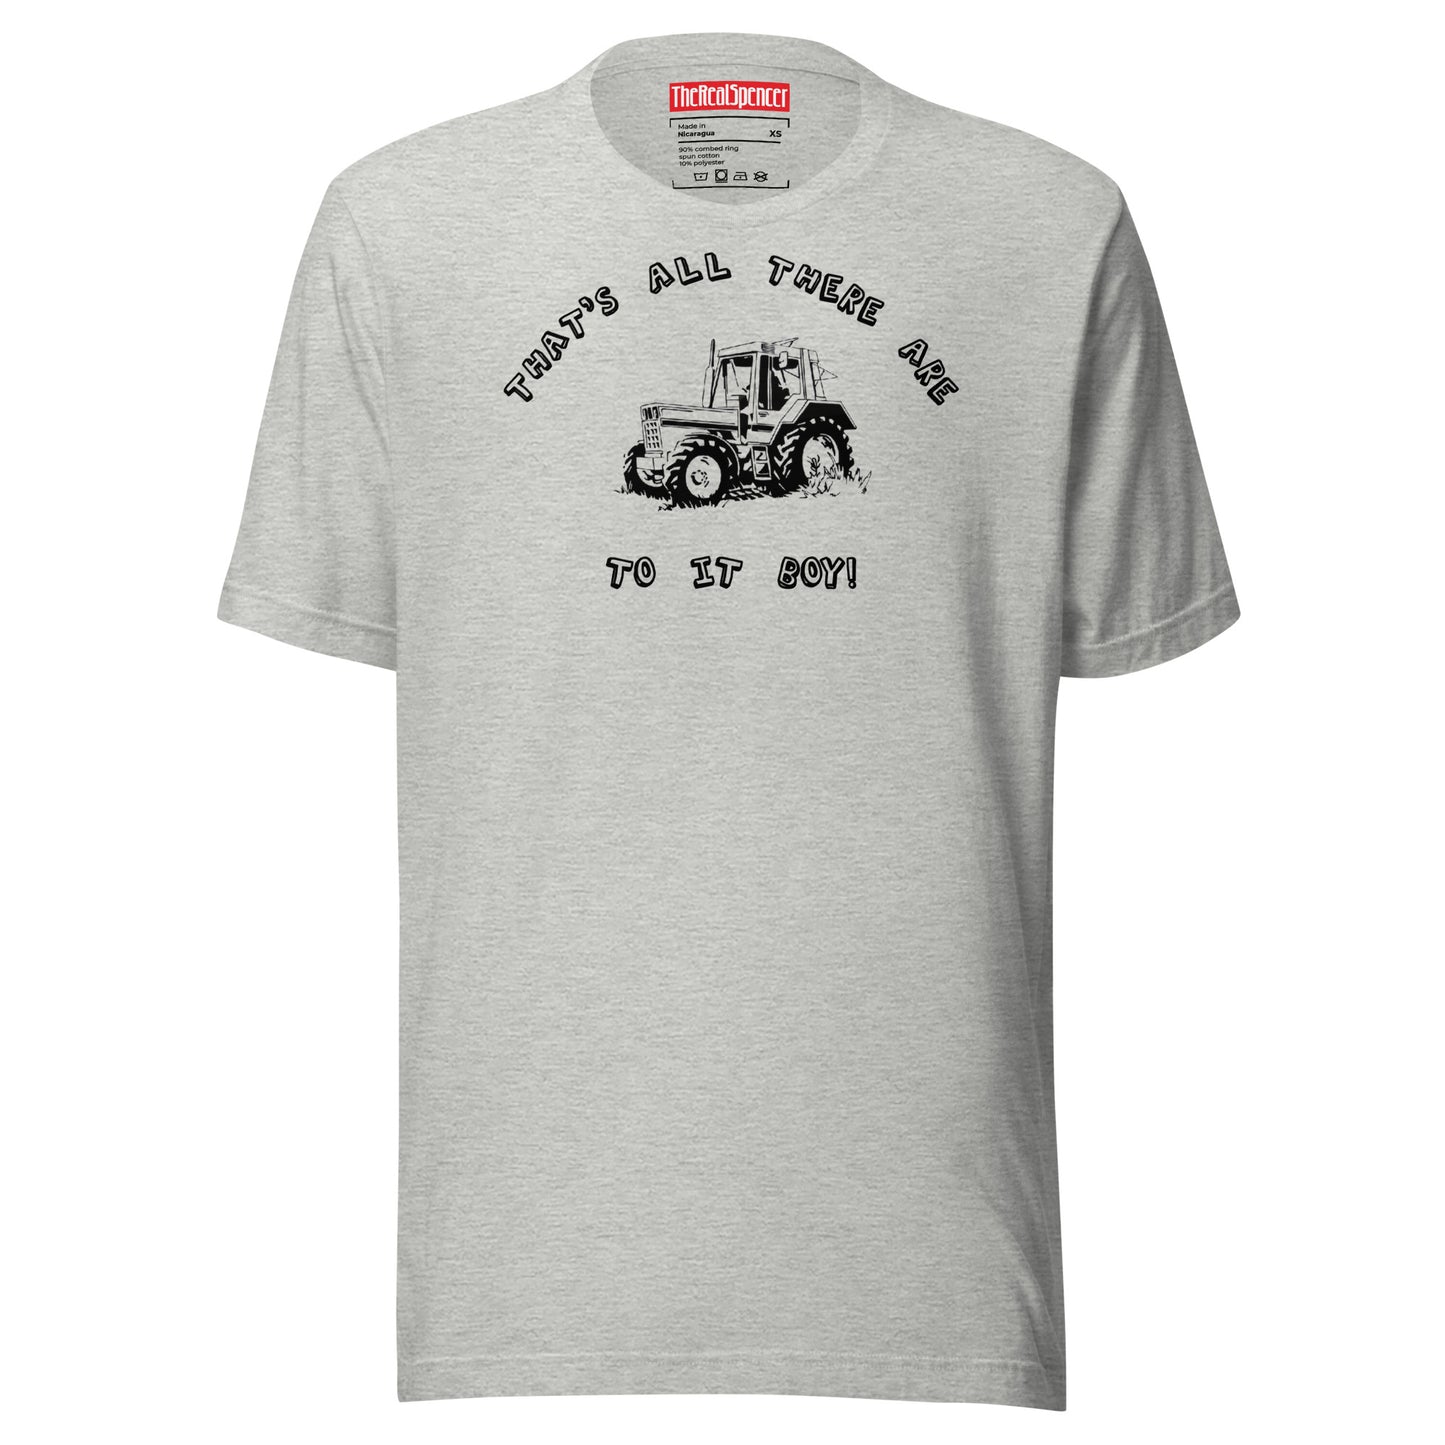 That's All There Are To It boy T-Shirt